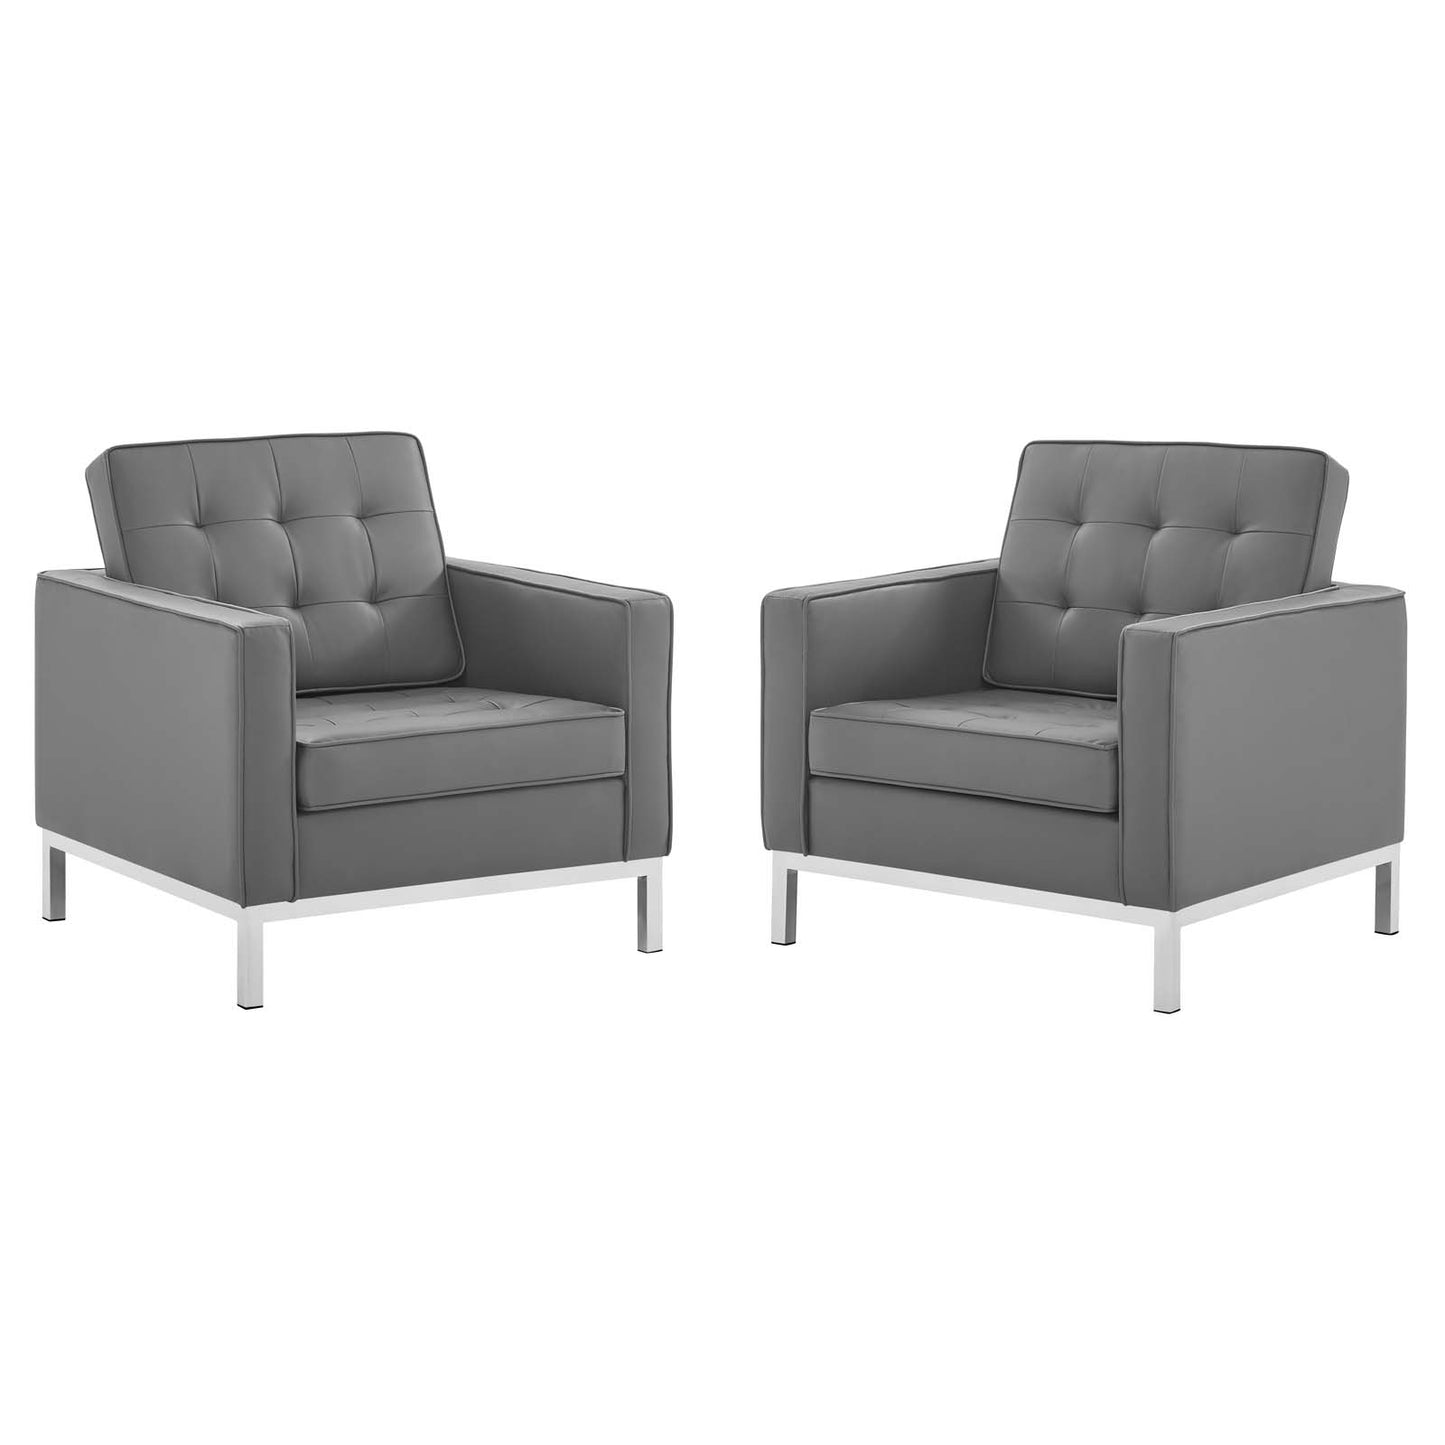 Loft Tufted Vegan Leather Armchairs - Set of 2 Silver Gray EEI-4101-SLV-GRY